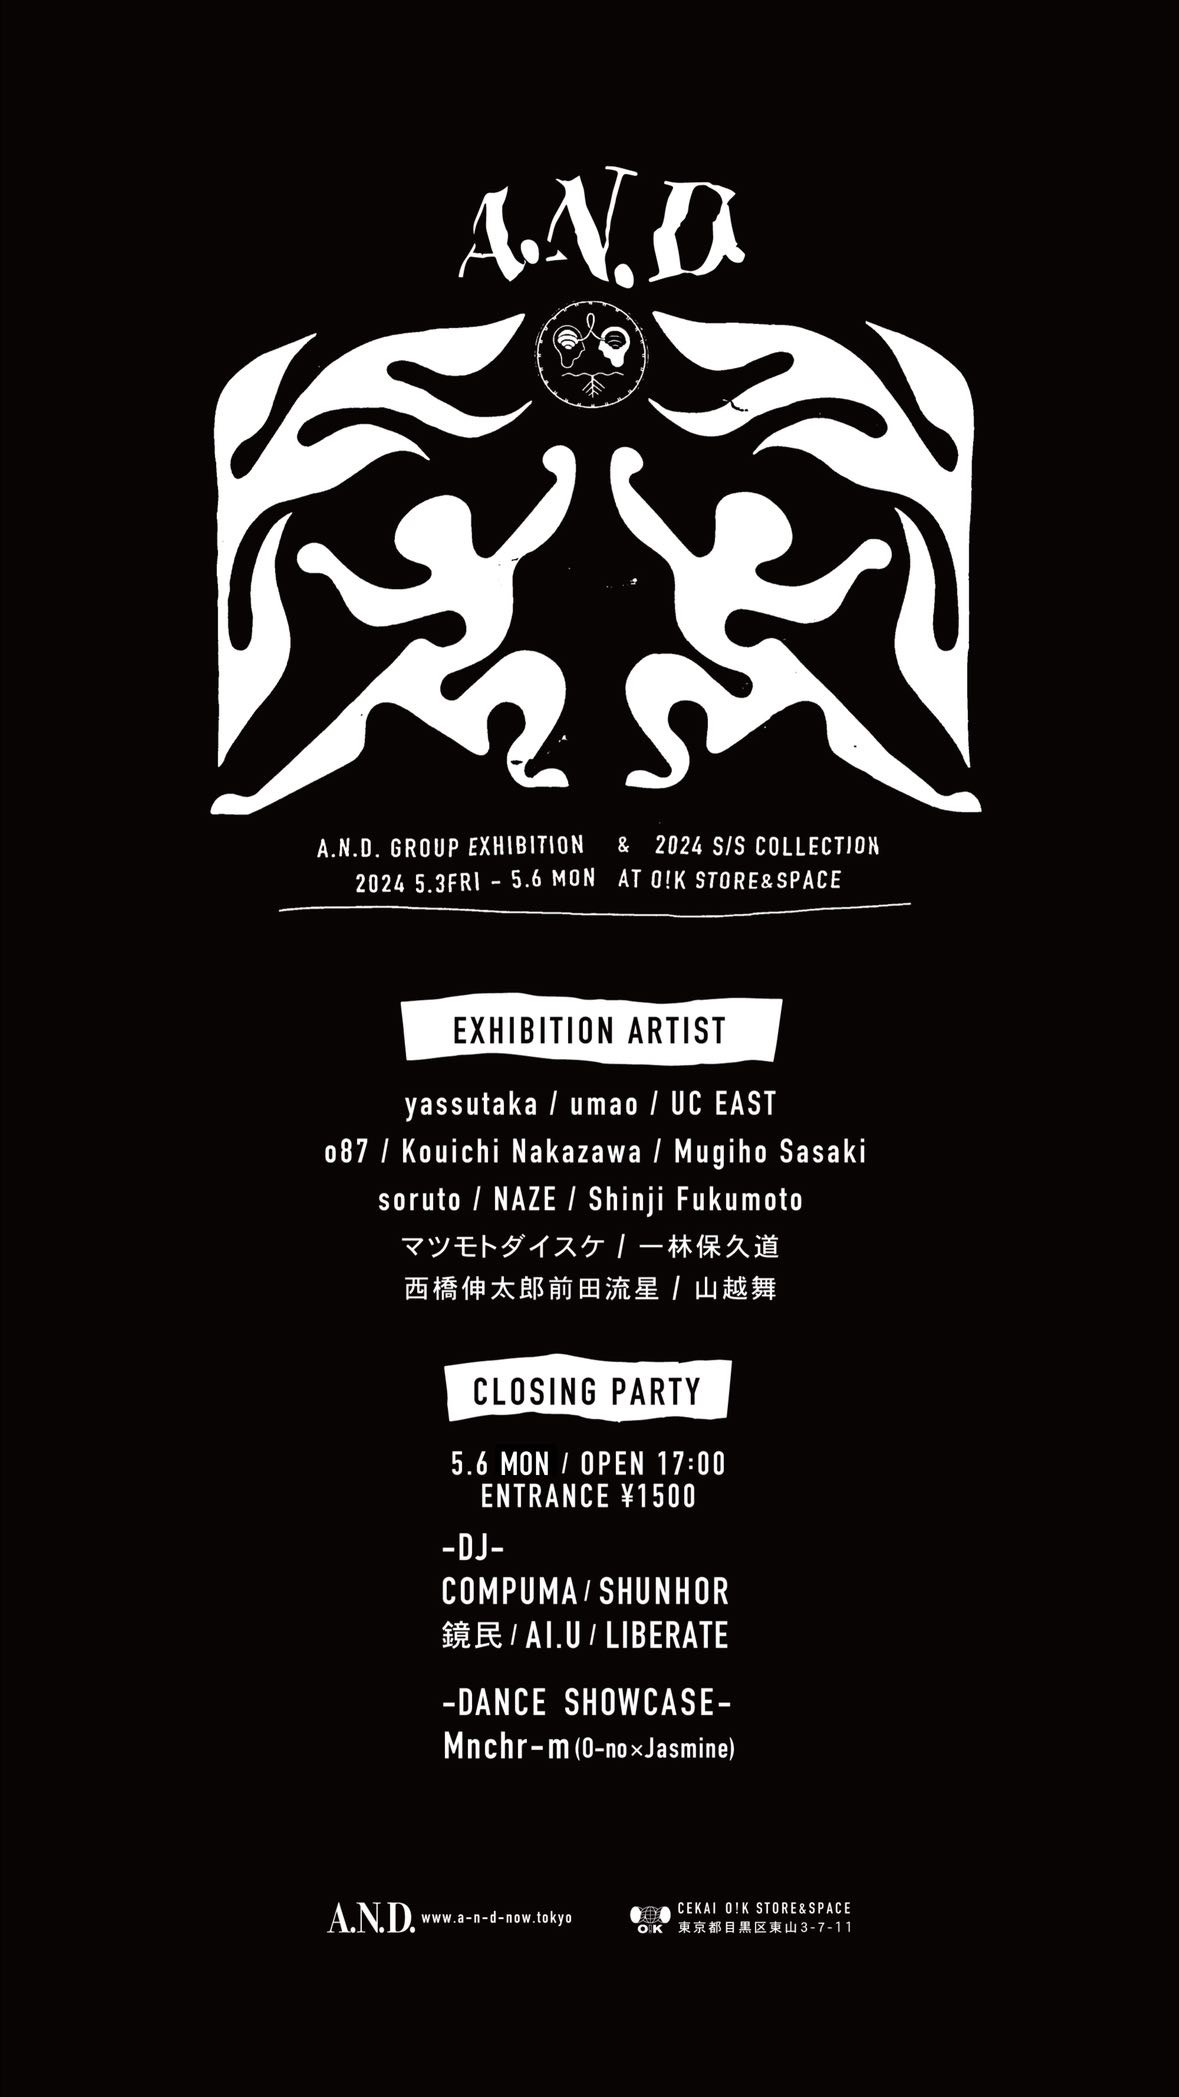 A.N.D. GROUP EXHIBITION & 2024 S/S COLLECTION POPUP SHOP / CLOSING PARTY